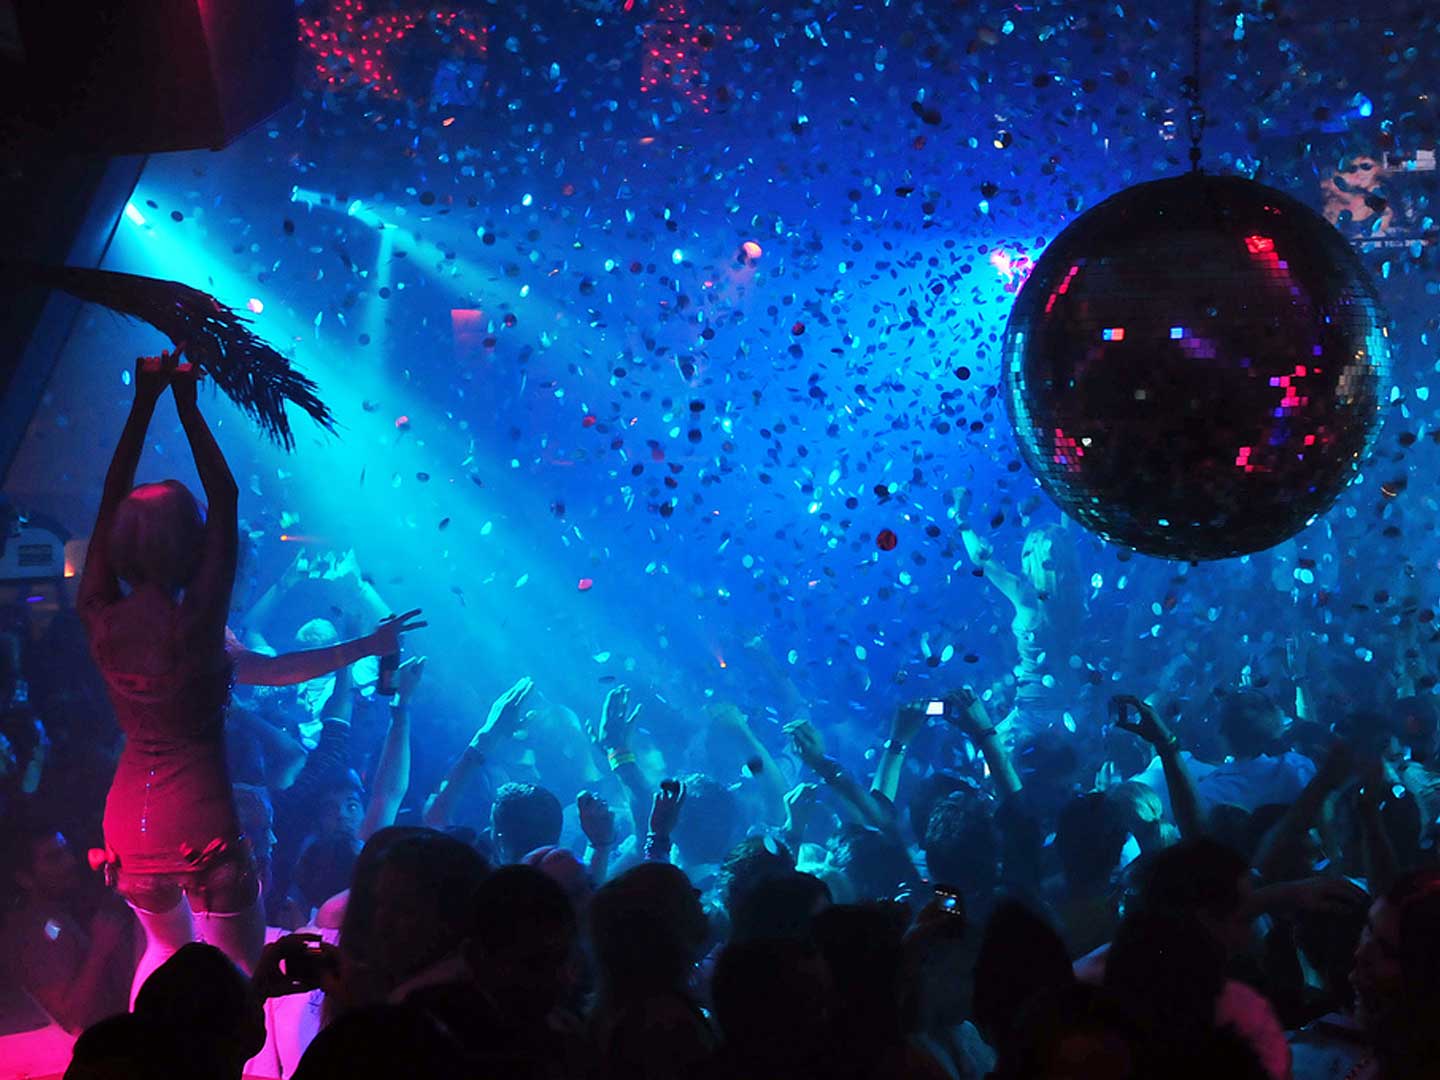 Free download Ibiza Night Club Ibiza Nightlife Clubs Vip [1440x1080] for your Desktop, Mobile & Tablet. Explore Night Club Wallpaper. Night HD Wallpaper, Night Wallpaper, Night Time Wallpaper